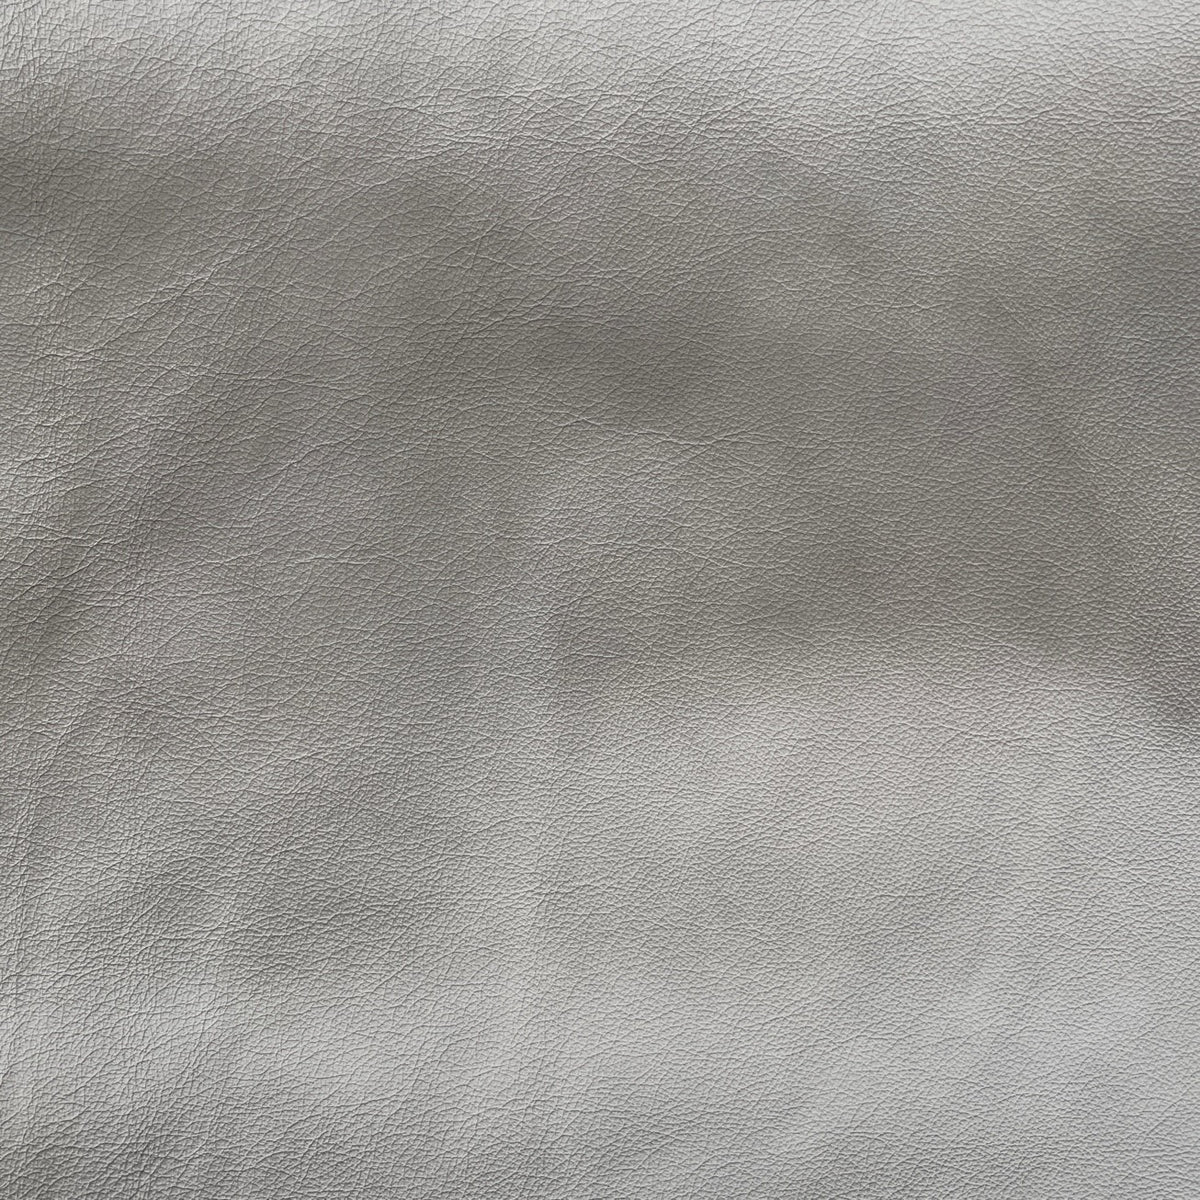 Upholstery Cow Hide #28a and b | Grey | 1.0mm | 58 sq.ft | From $405 ea.